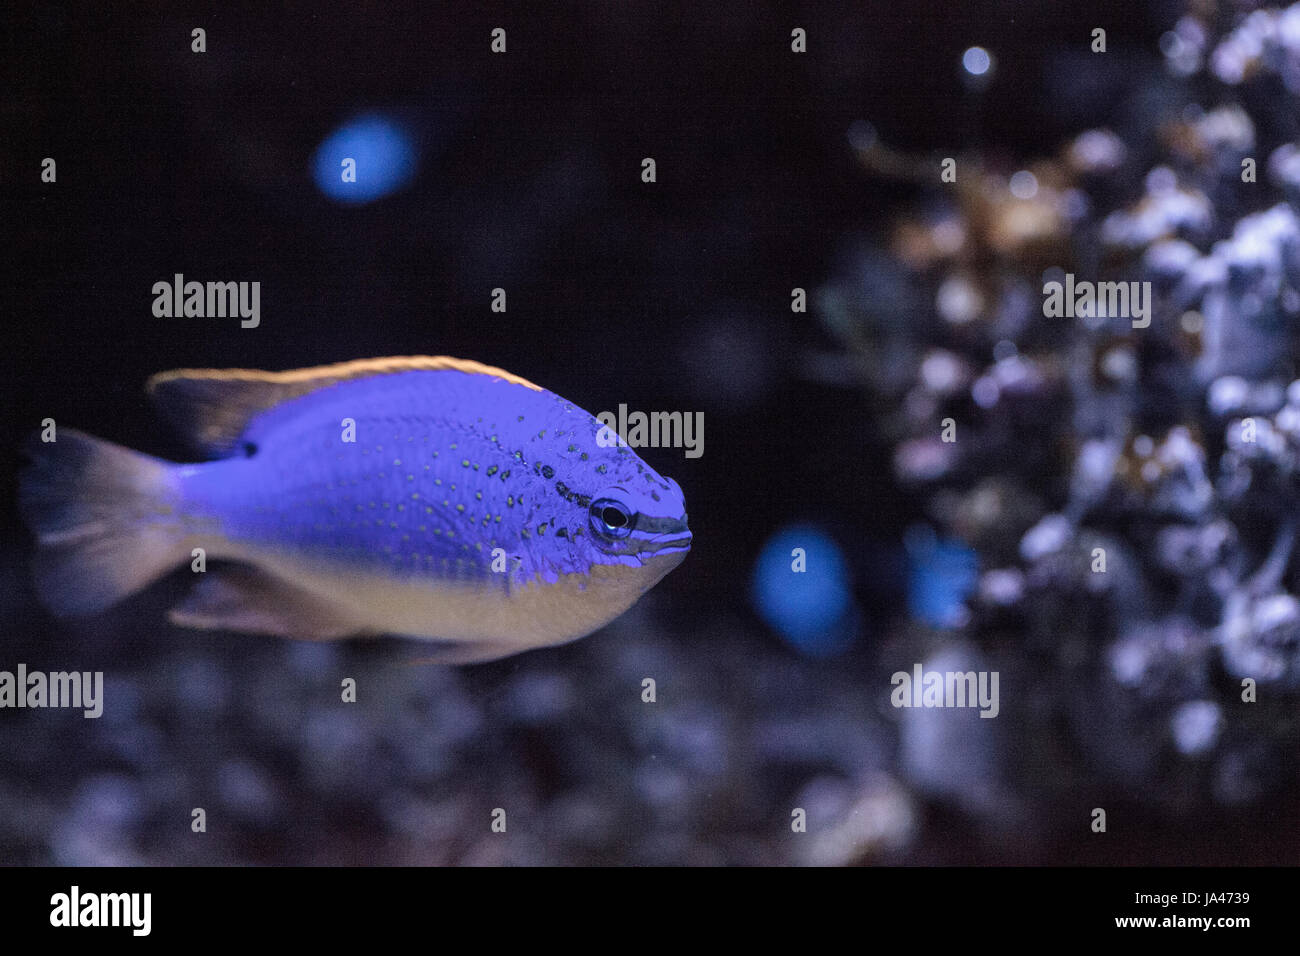 Fiji Blue devil damselfish chrysiptera parasema is found in the Indo-Pacific Stock Photo